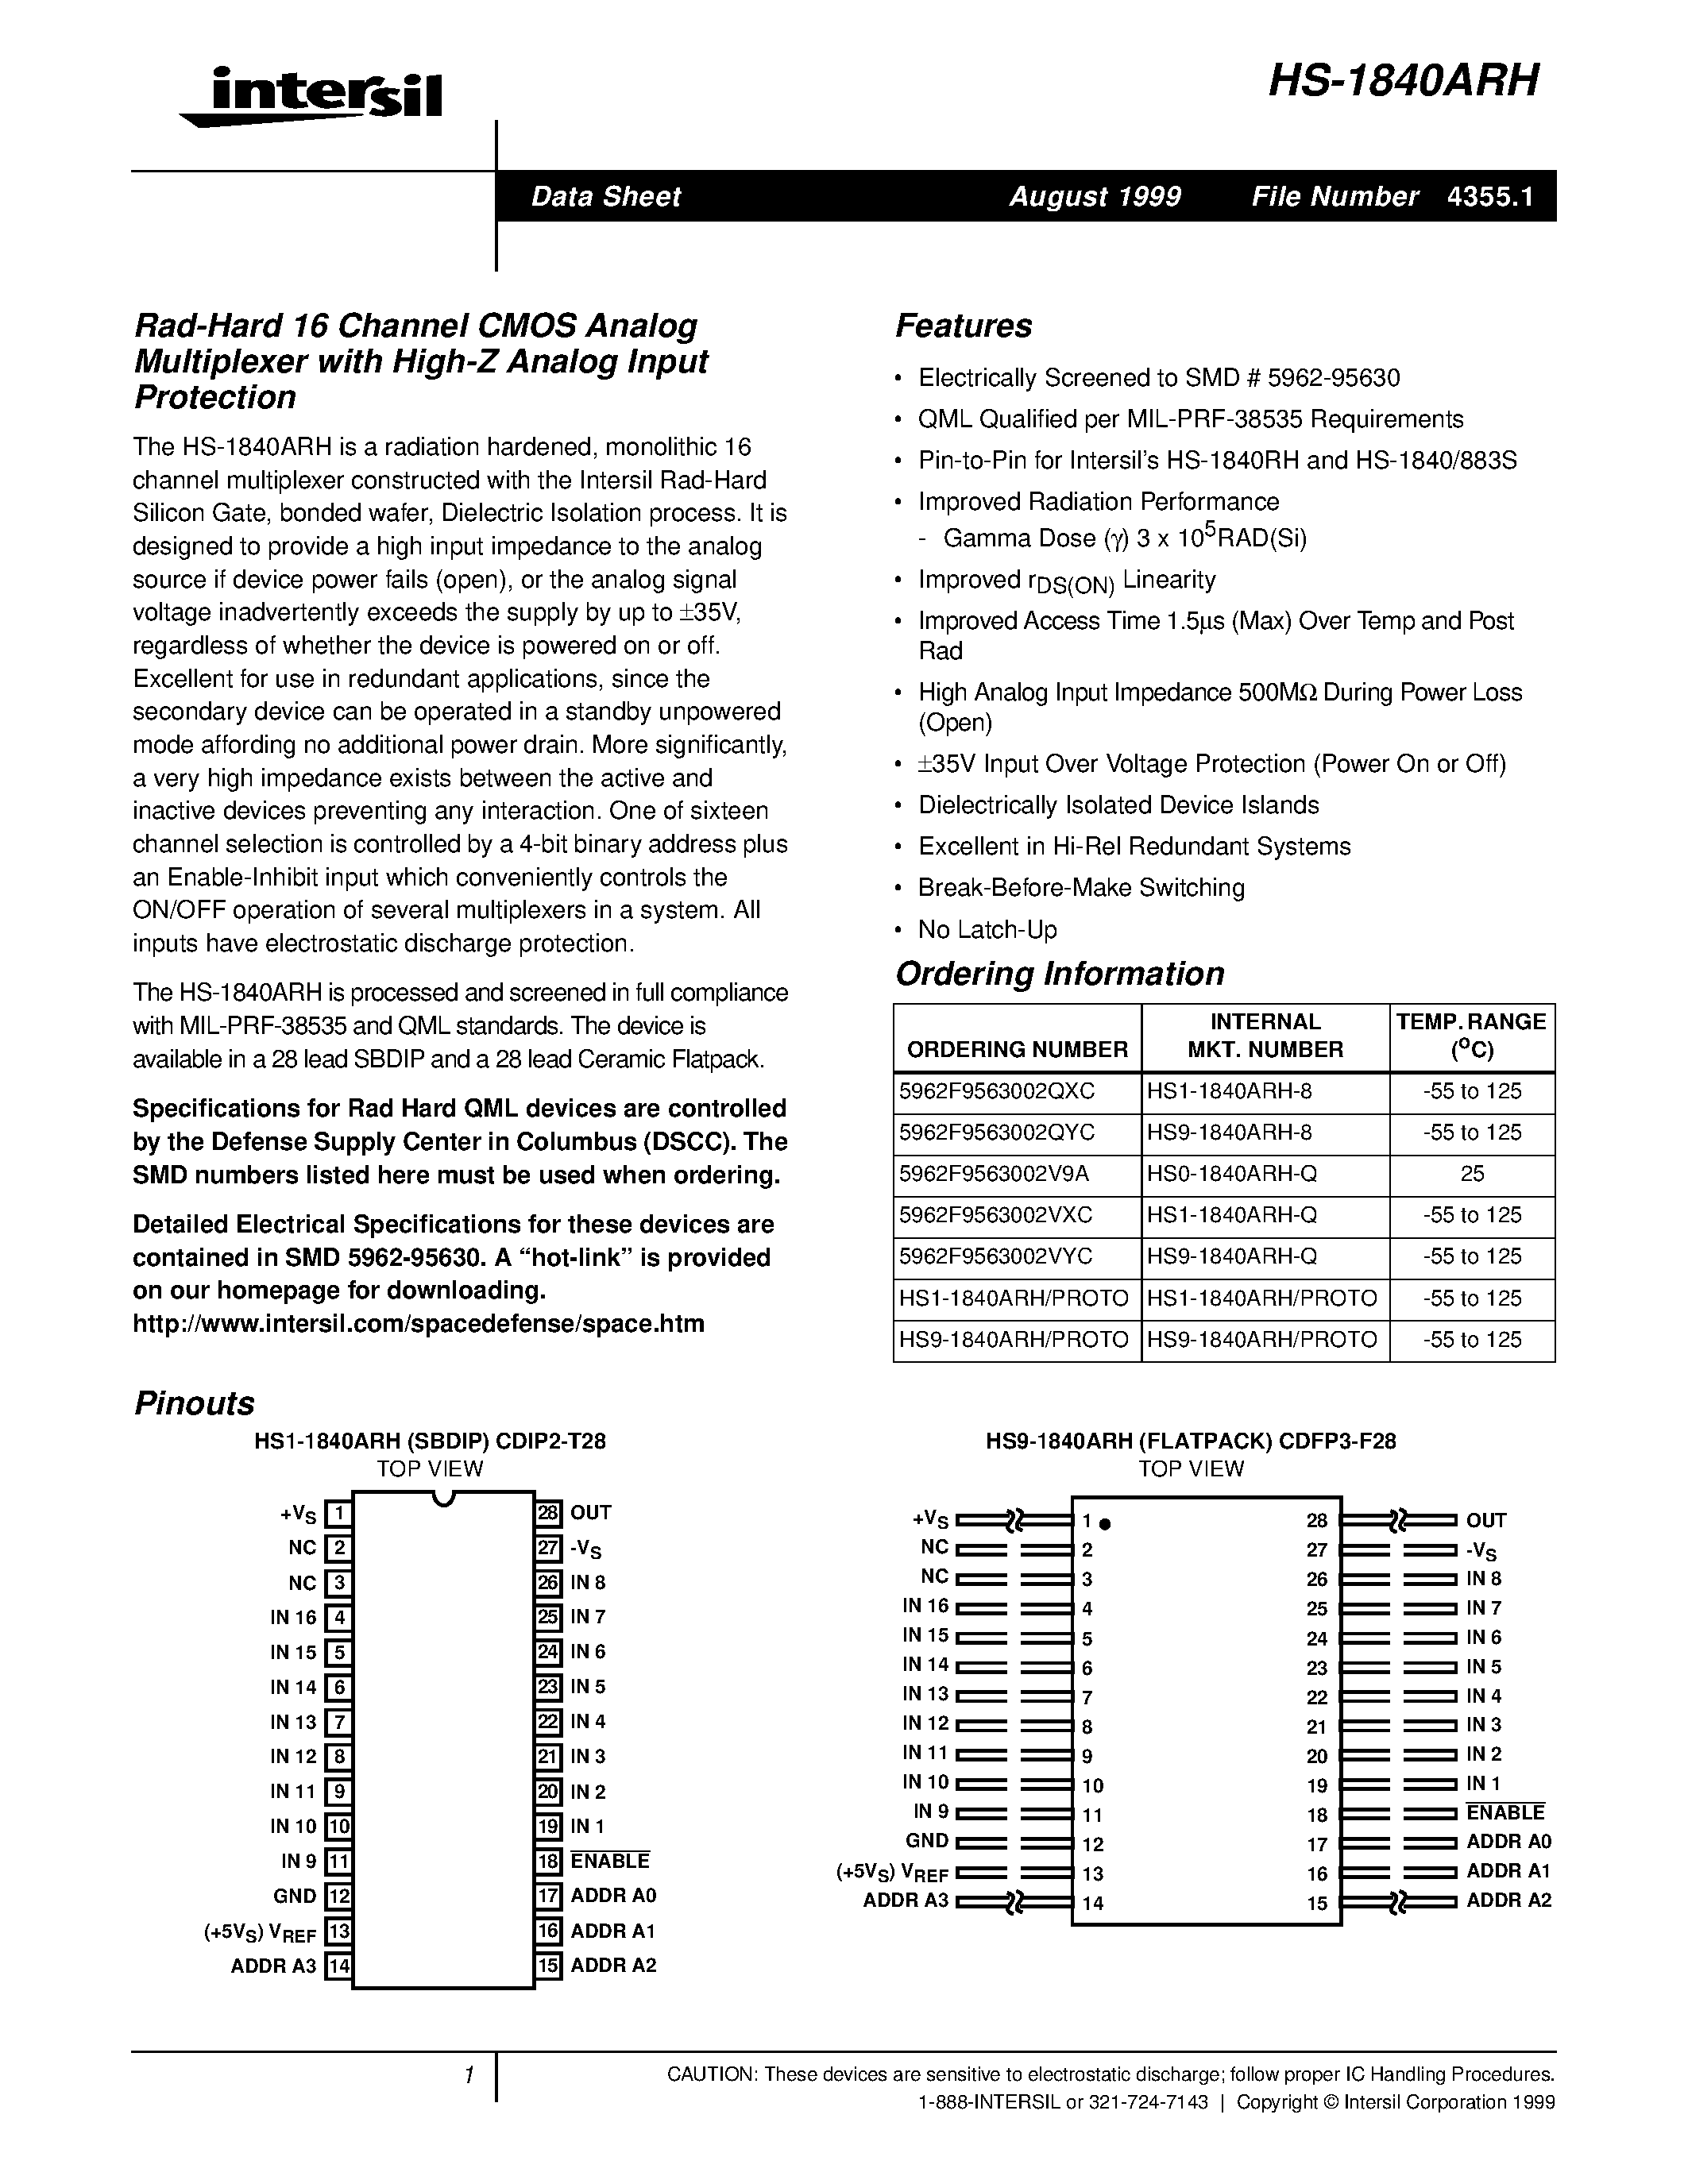 Datasheet HS9-1840ARH-8 - Rad-Hard 16 Channel CMOS Analog Multiplexer with High-Z Analog Input Protection page 1